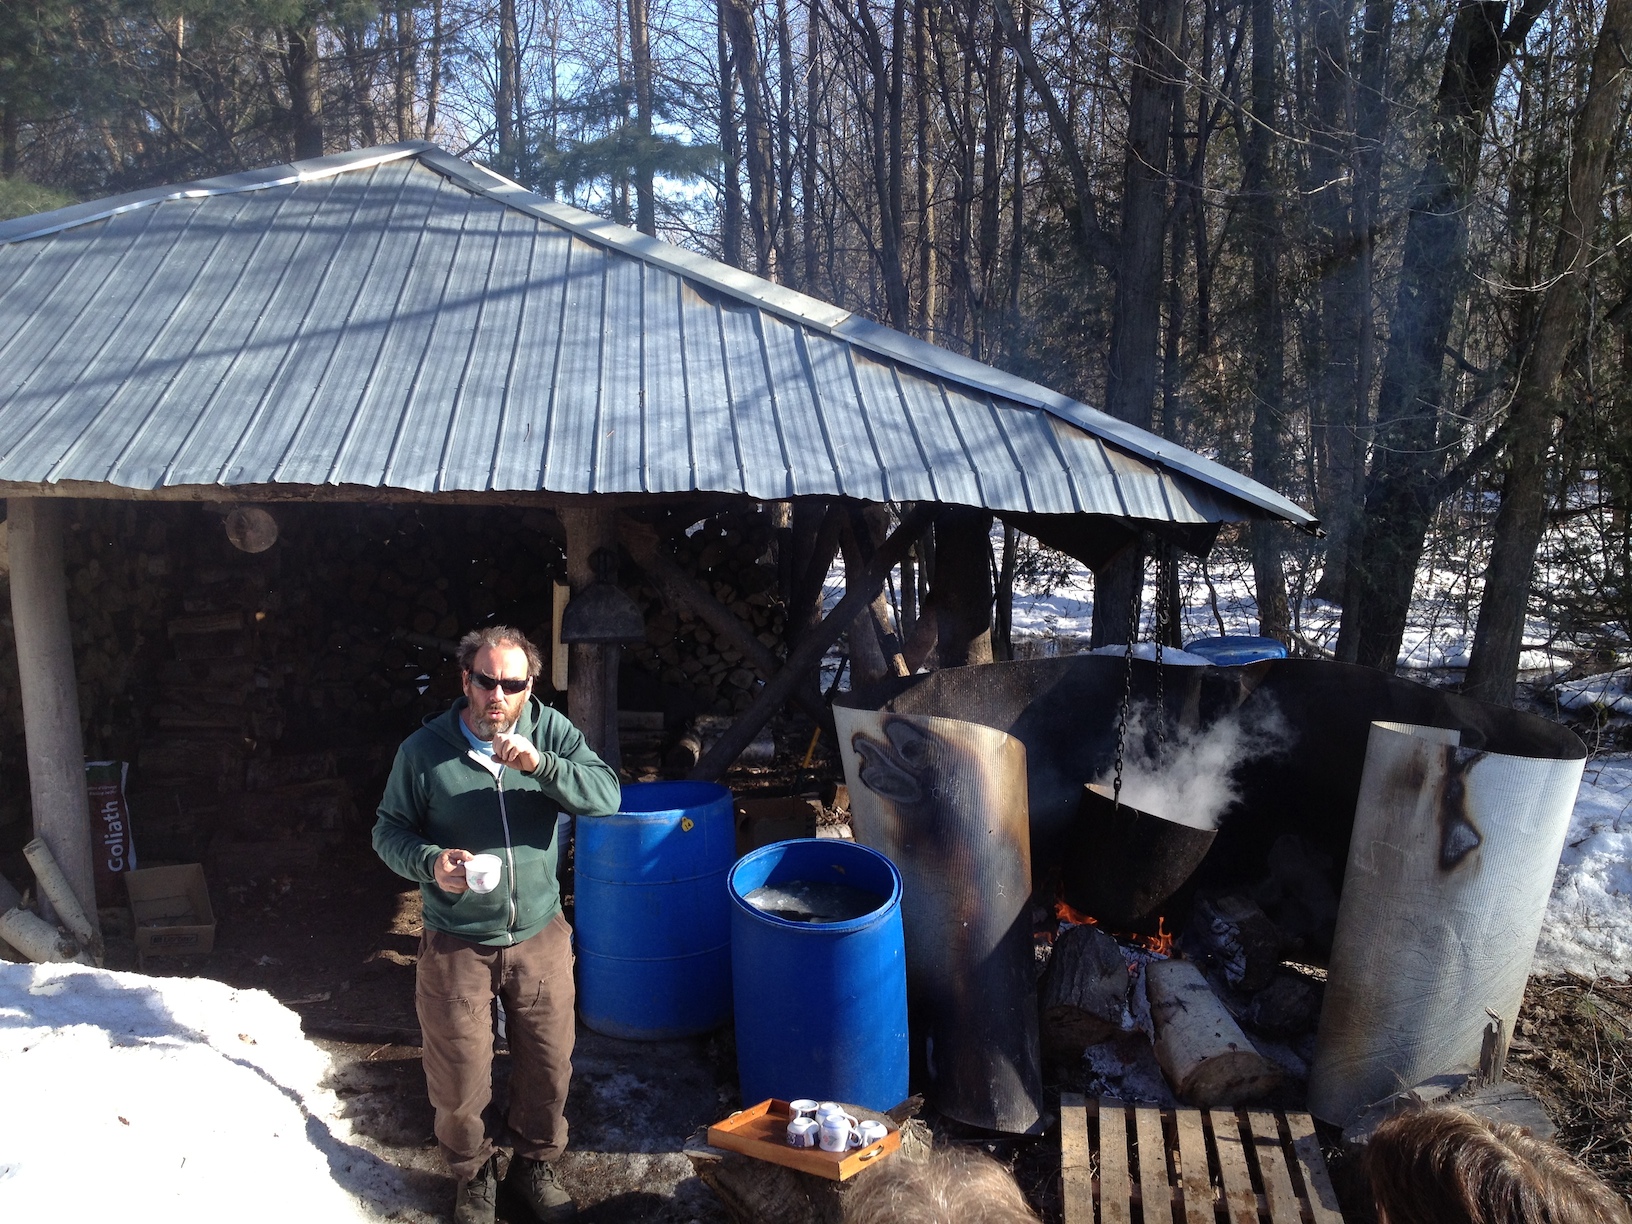  Farm owner Ian Walker explaining the process of Maple syrup production beside his cauldron of boiling sap.​ 